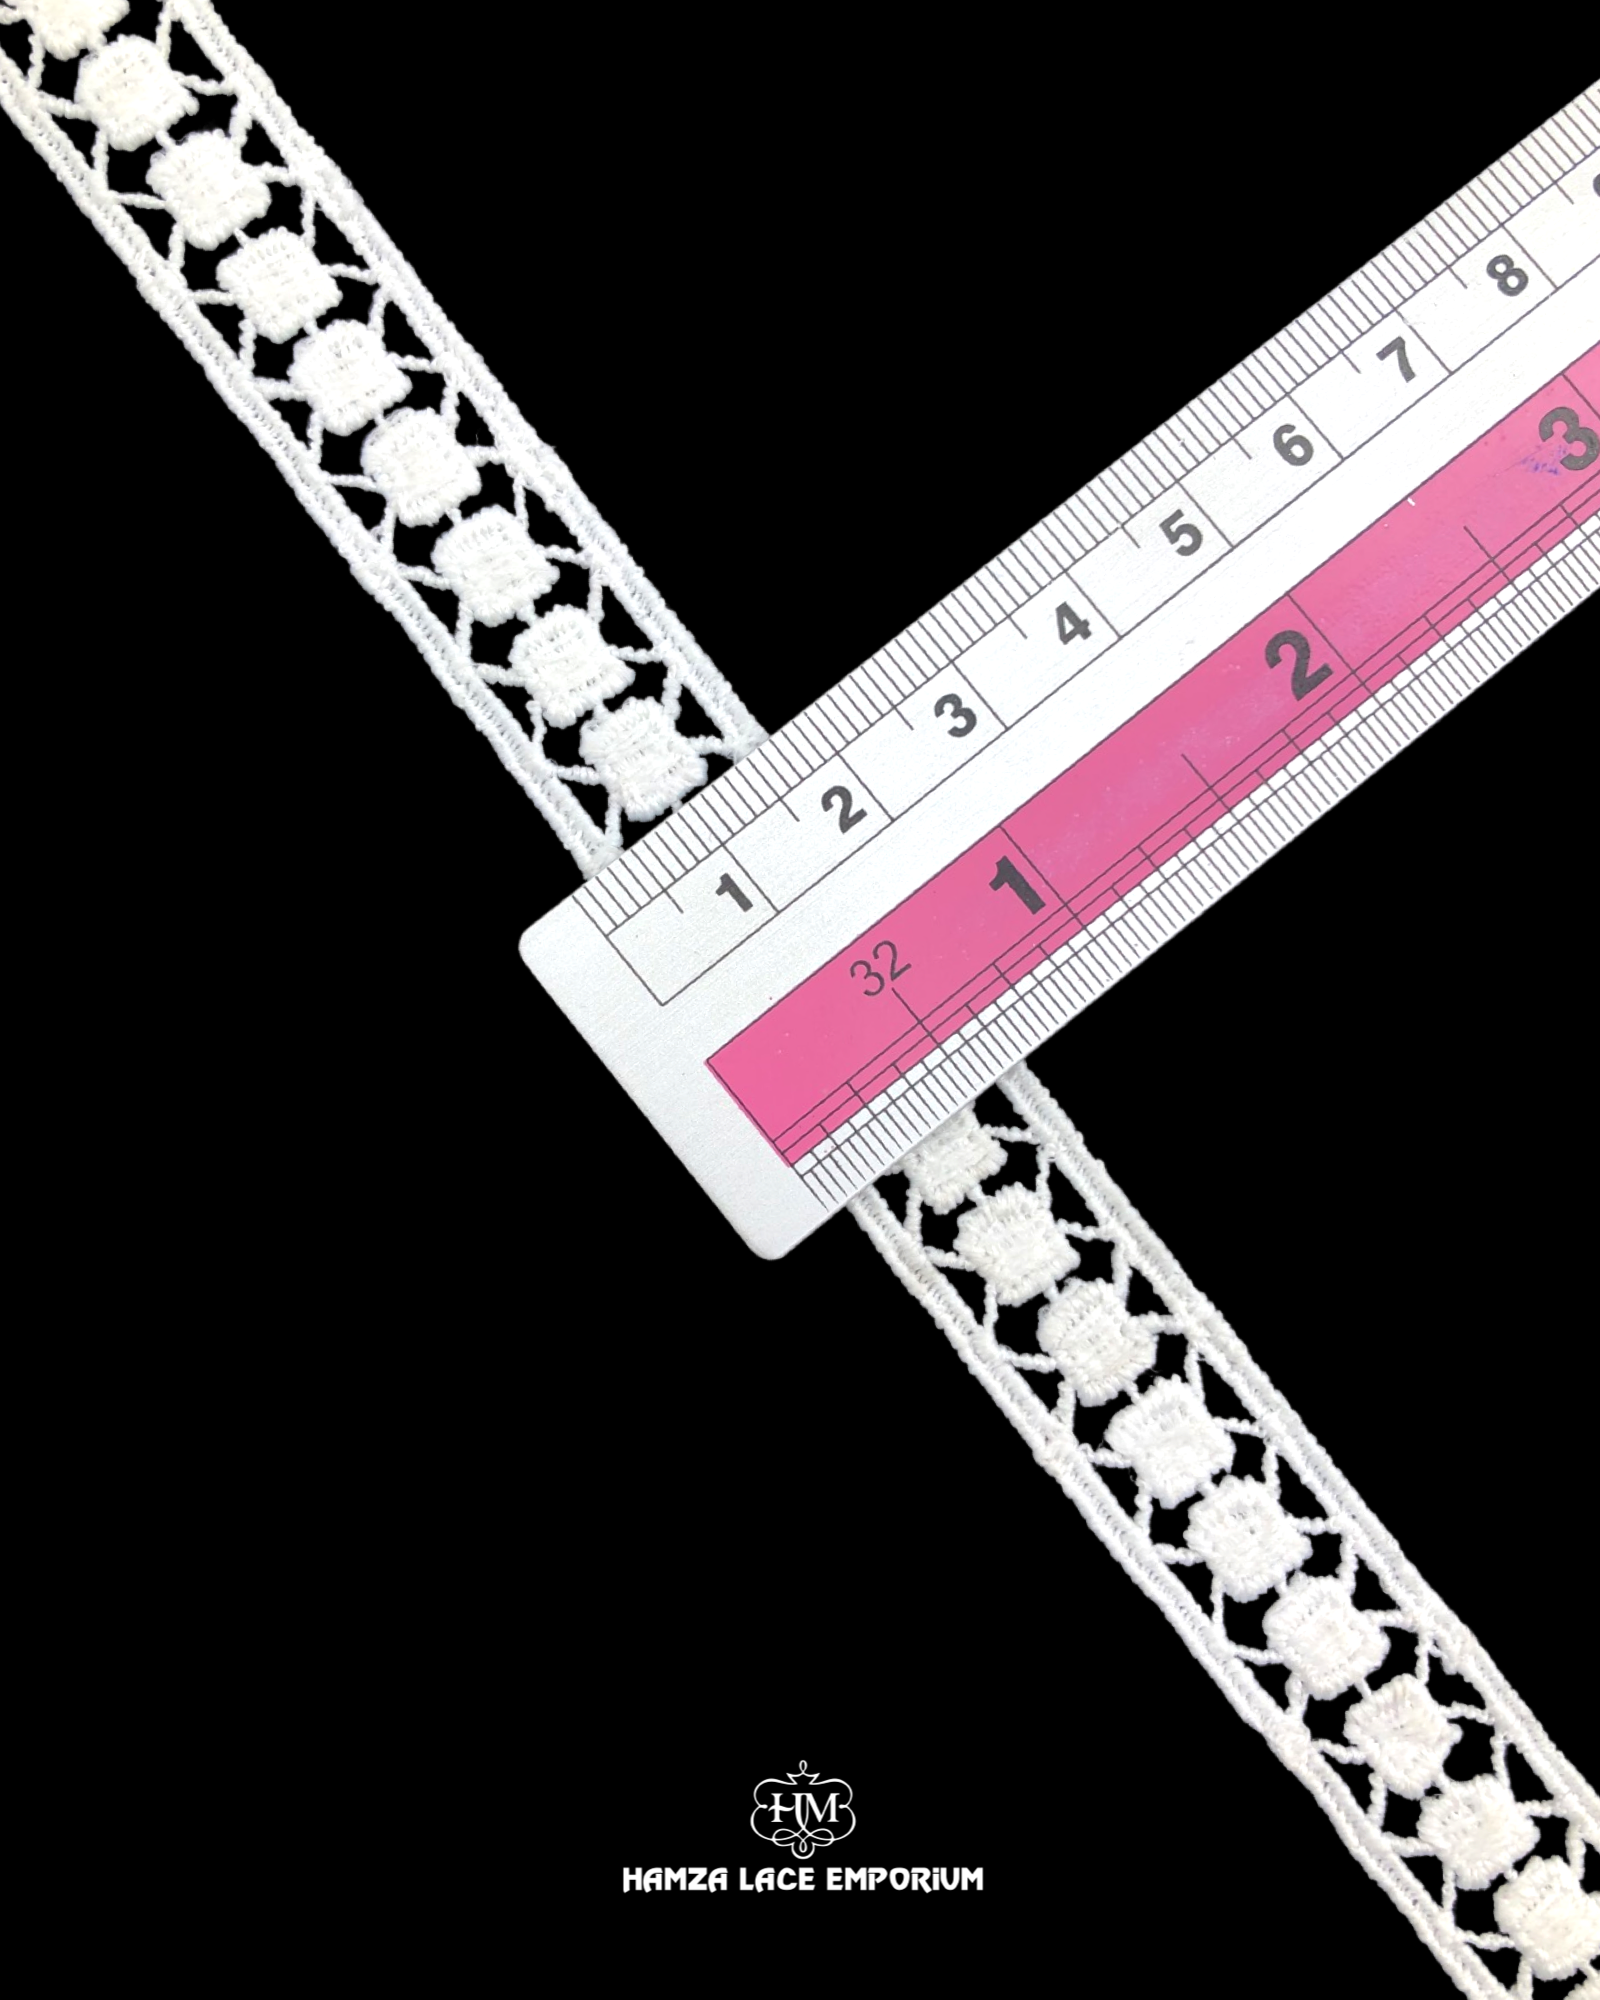 Size of the 'Center Filling Lace 2832' is given as 0.5 inches with the help of a ruler